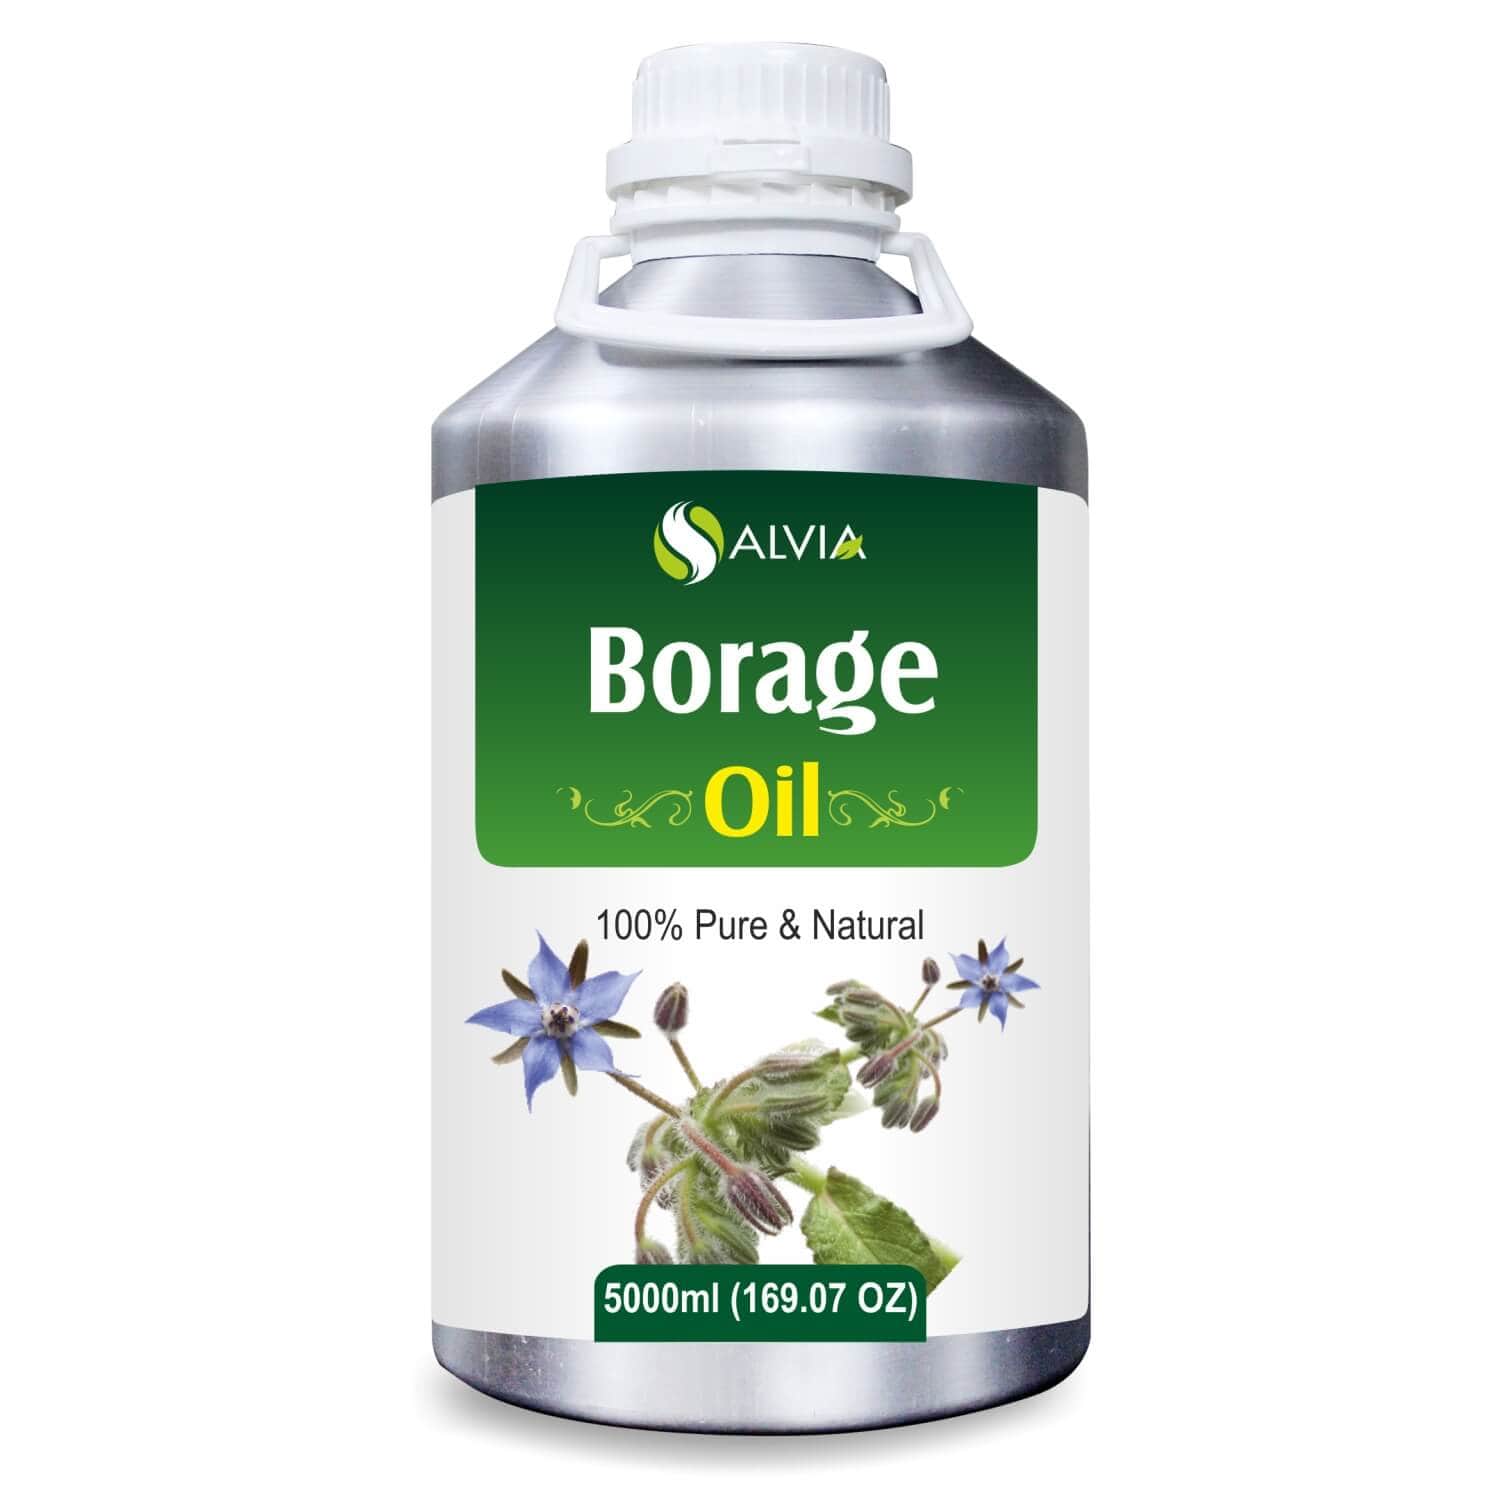 Salvia Natural Carrier Oils 5000ml Borage Oil (Borago officinalis) 100% Natural Pure Carrier Oil Treats Skin Inflammation, Dermatitis, Psoriasis, Nourishes Dry Skin, Calms Acne & More